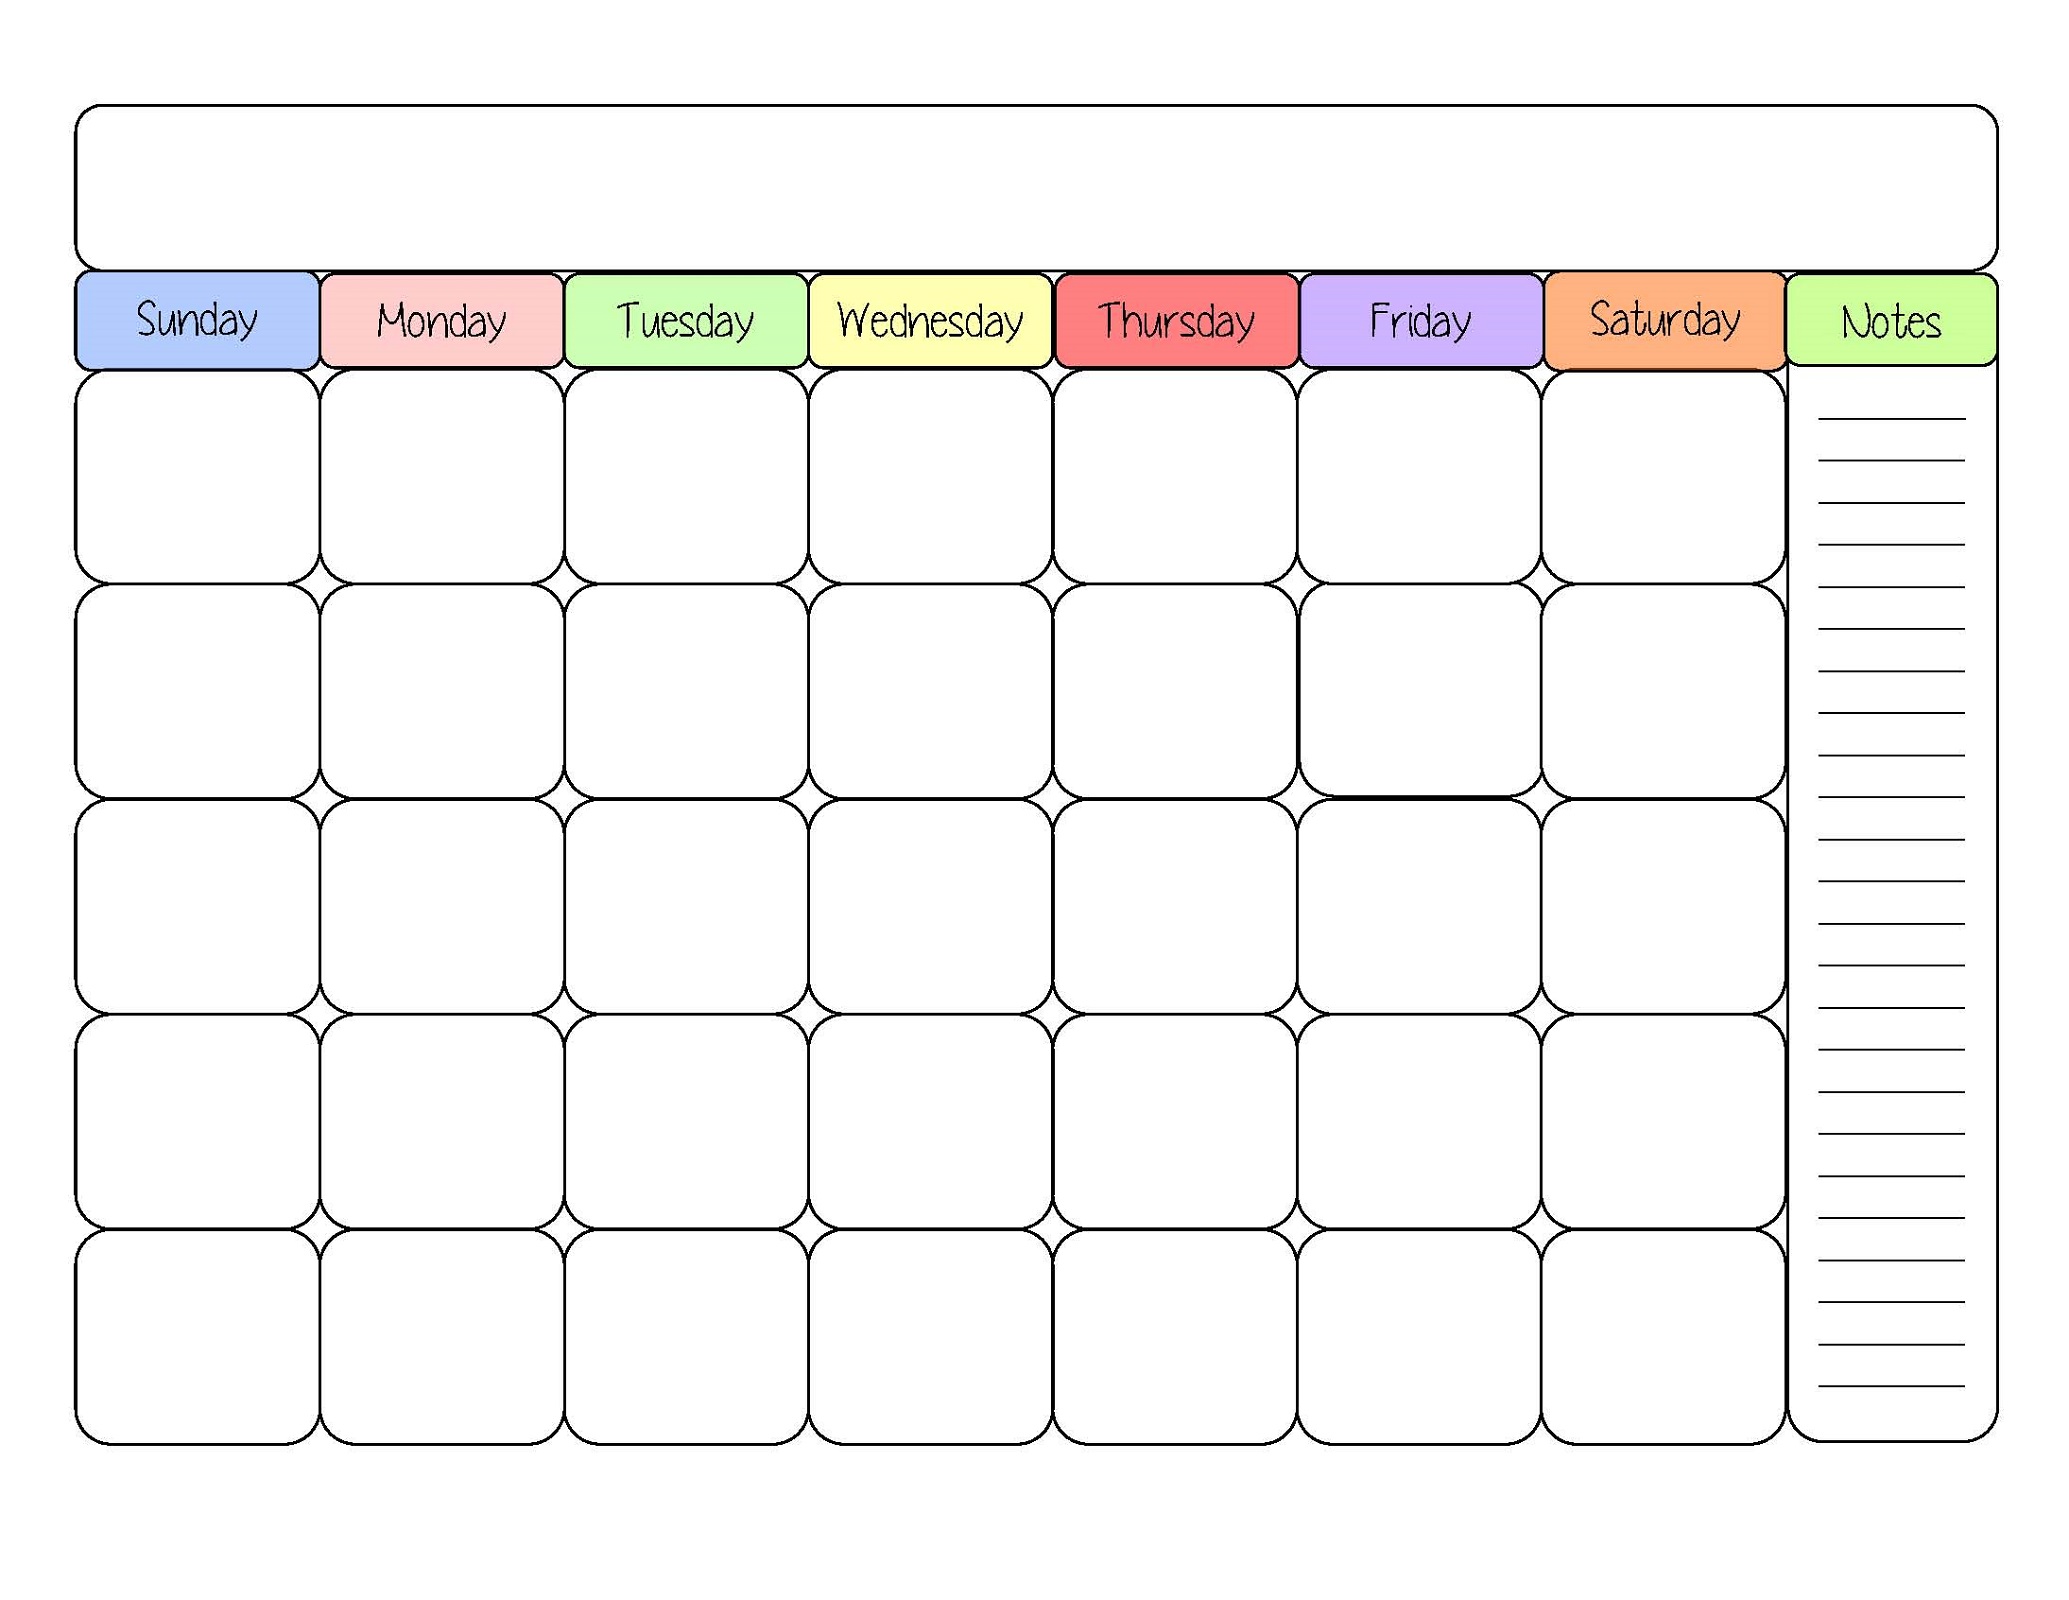 calendar template with notes section 47